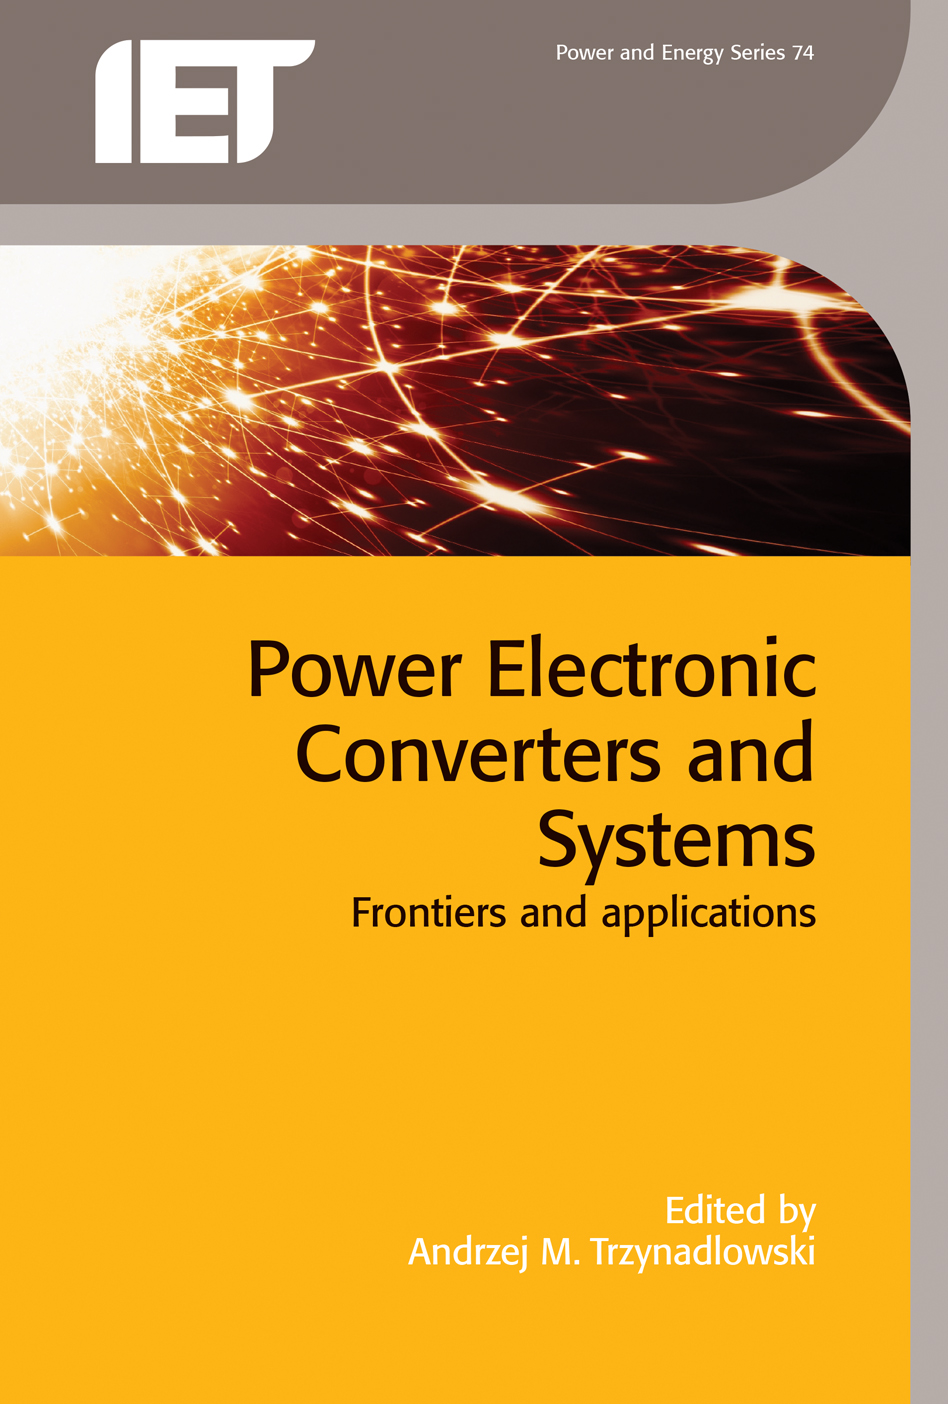 Power Electronic Converters and Systems, Frontiers and applications